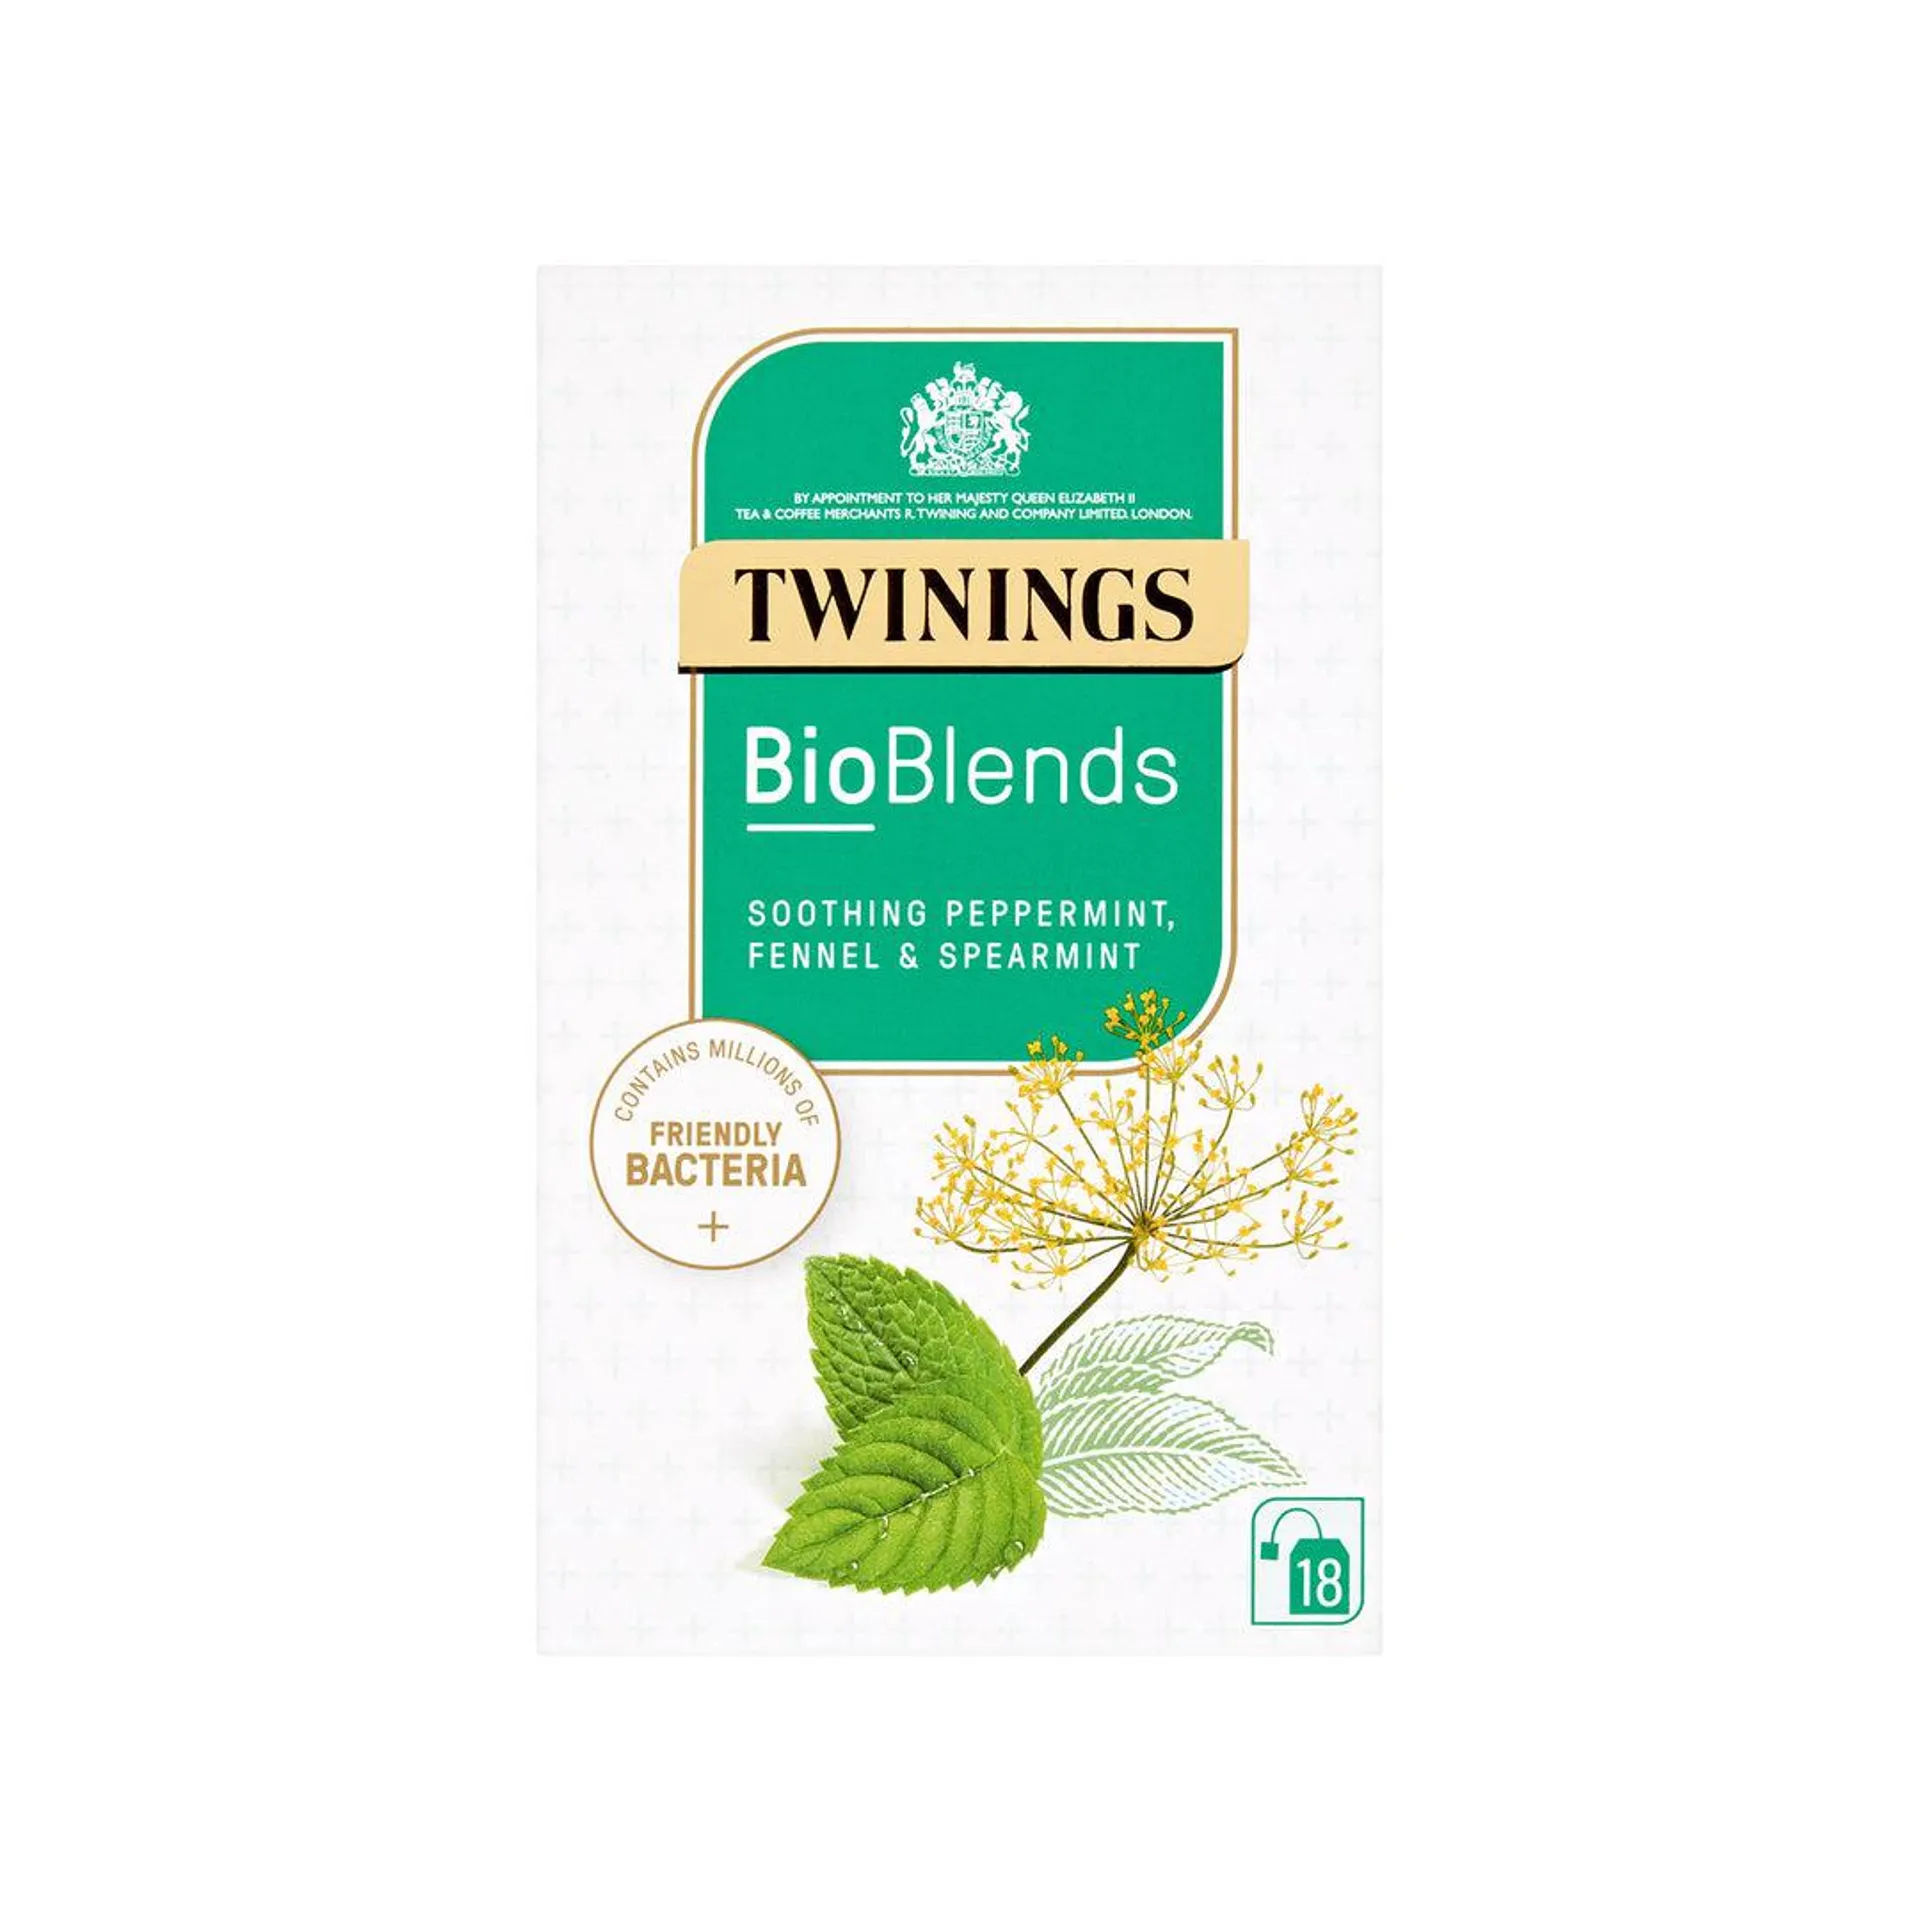 BioBlends Soothing Peppermint, Fennel & Spearmint